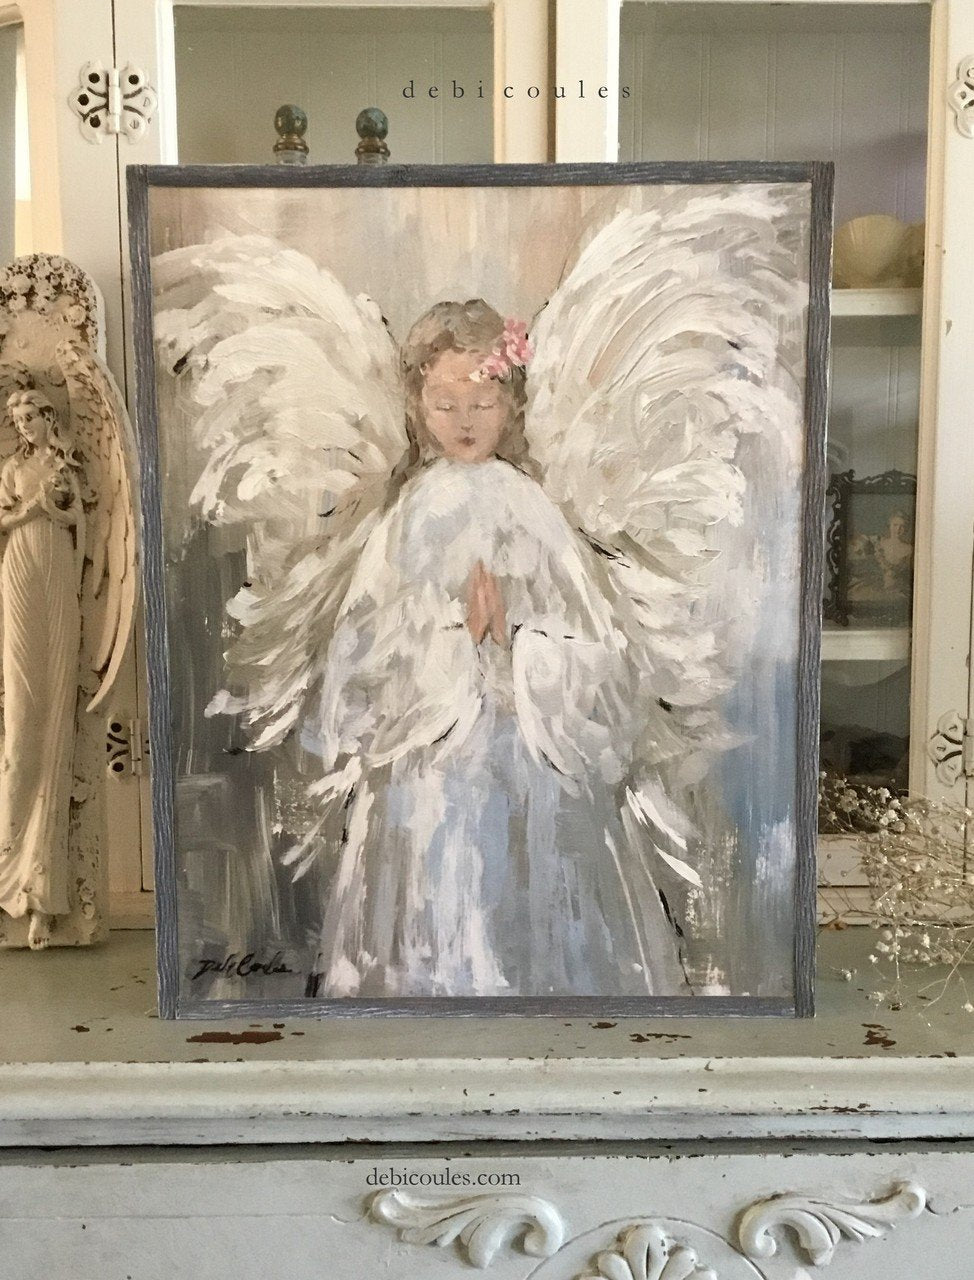 Shabby Chic angel artwork featuing an angel with her hands genlty clasped and wearing a halo of roses. Printed on wood showing natural grain and texture.